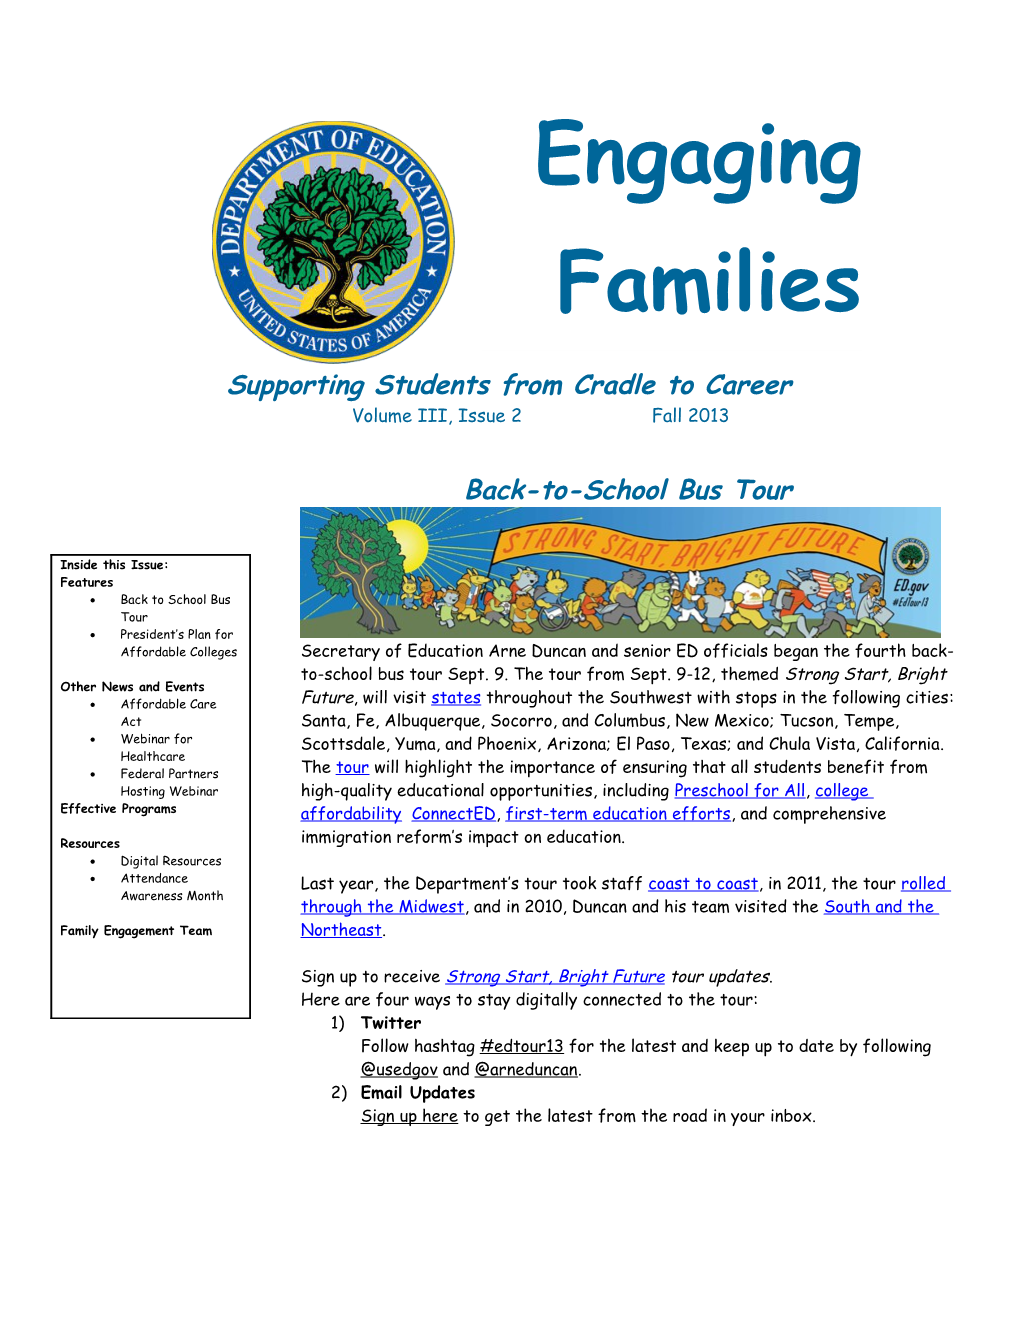 Engaging Families: Supporting Students from Cradle to Career, Volume III, Issue 2, Fall